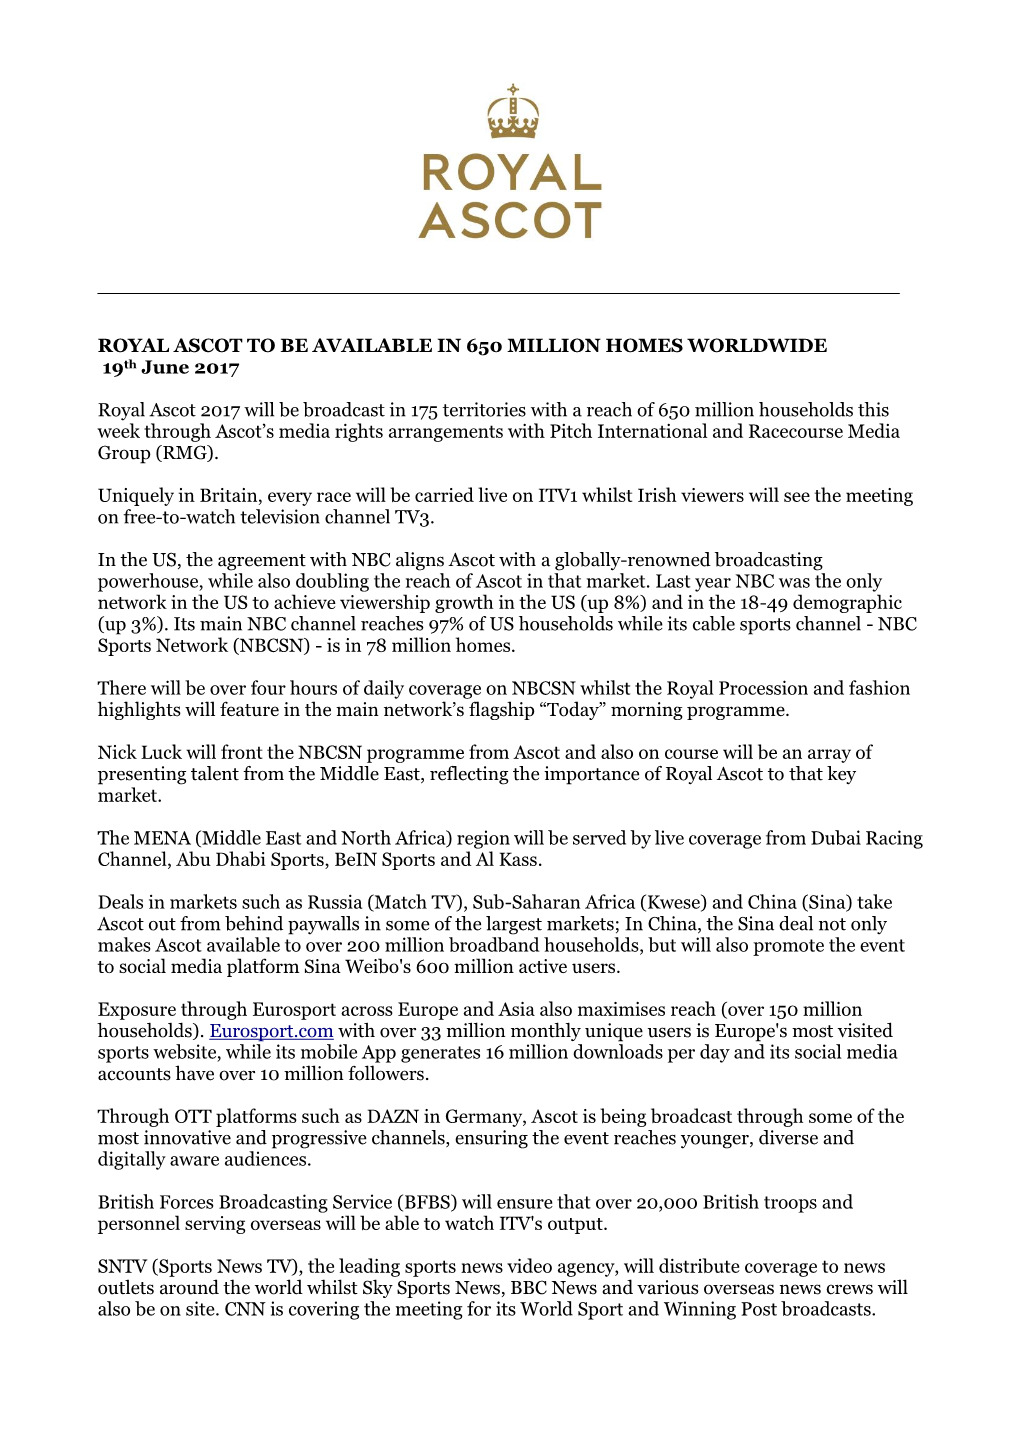 ROYAL ASCOT to BE AVAILABLE in 650 MILLION HOMES WORLDWIDE 19Th June 2017